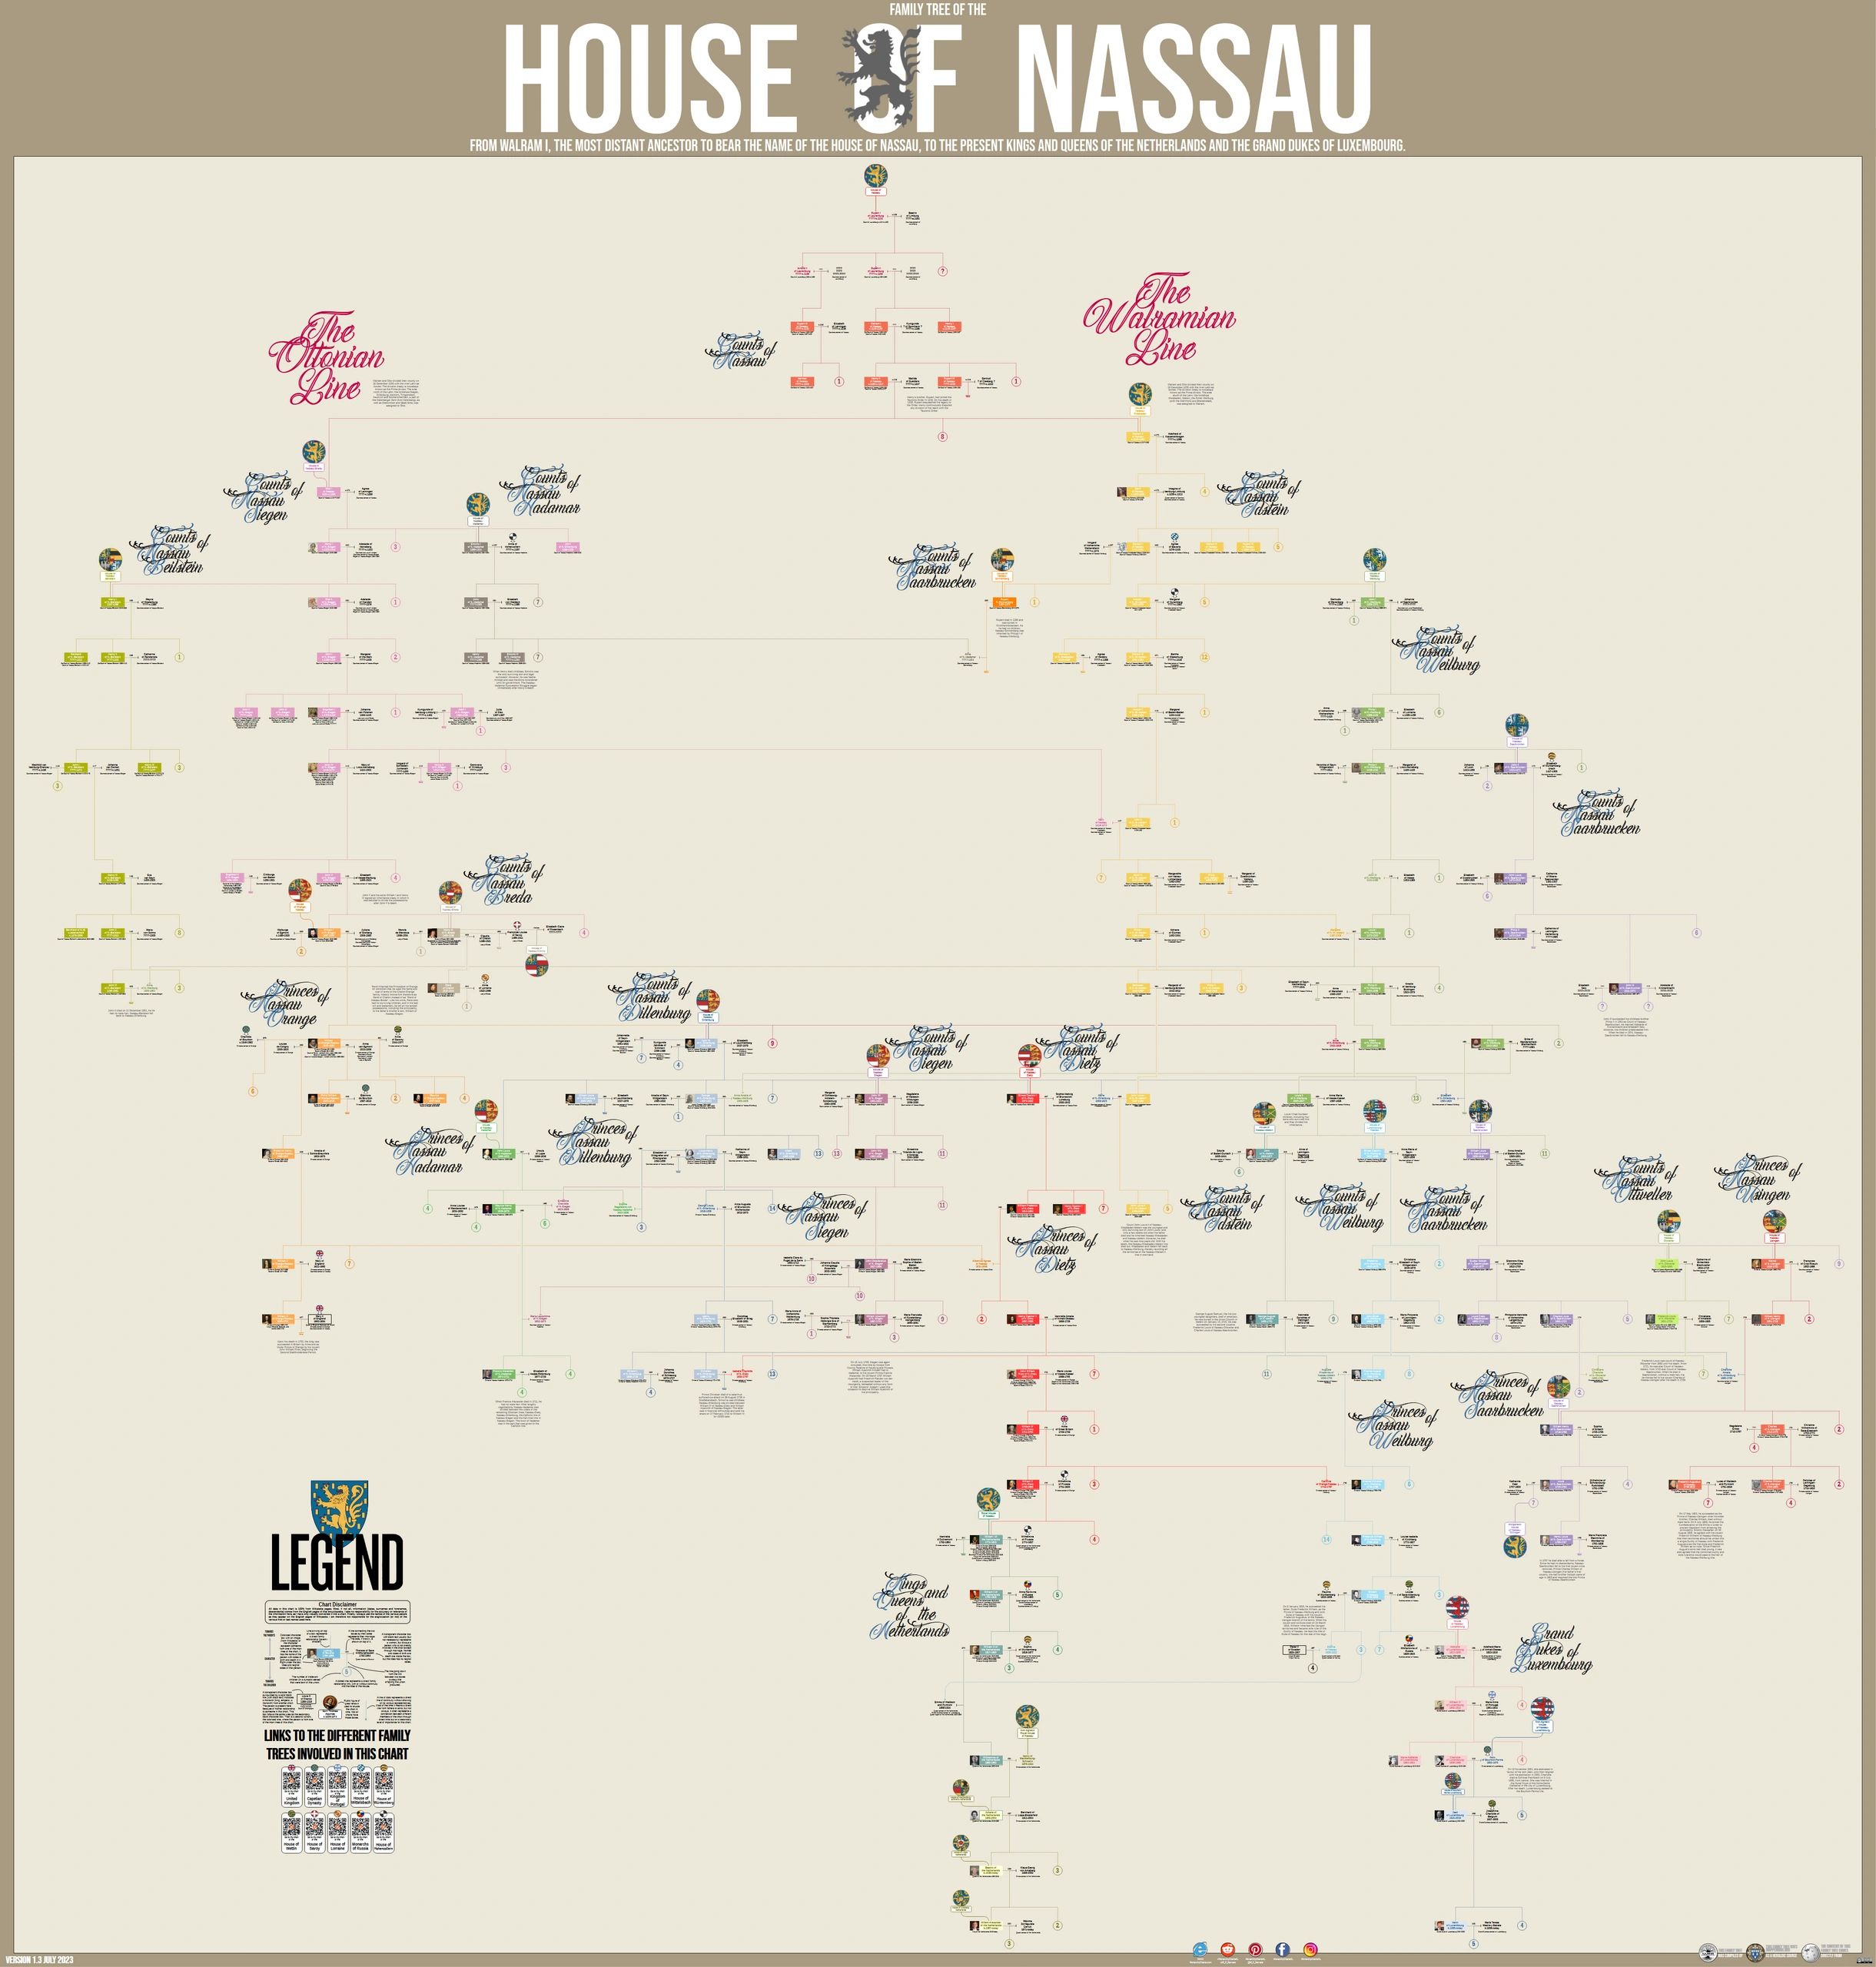 CHART, FAMILY TREE OF THE HOUSE OF NASSAU.